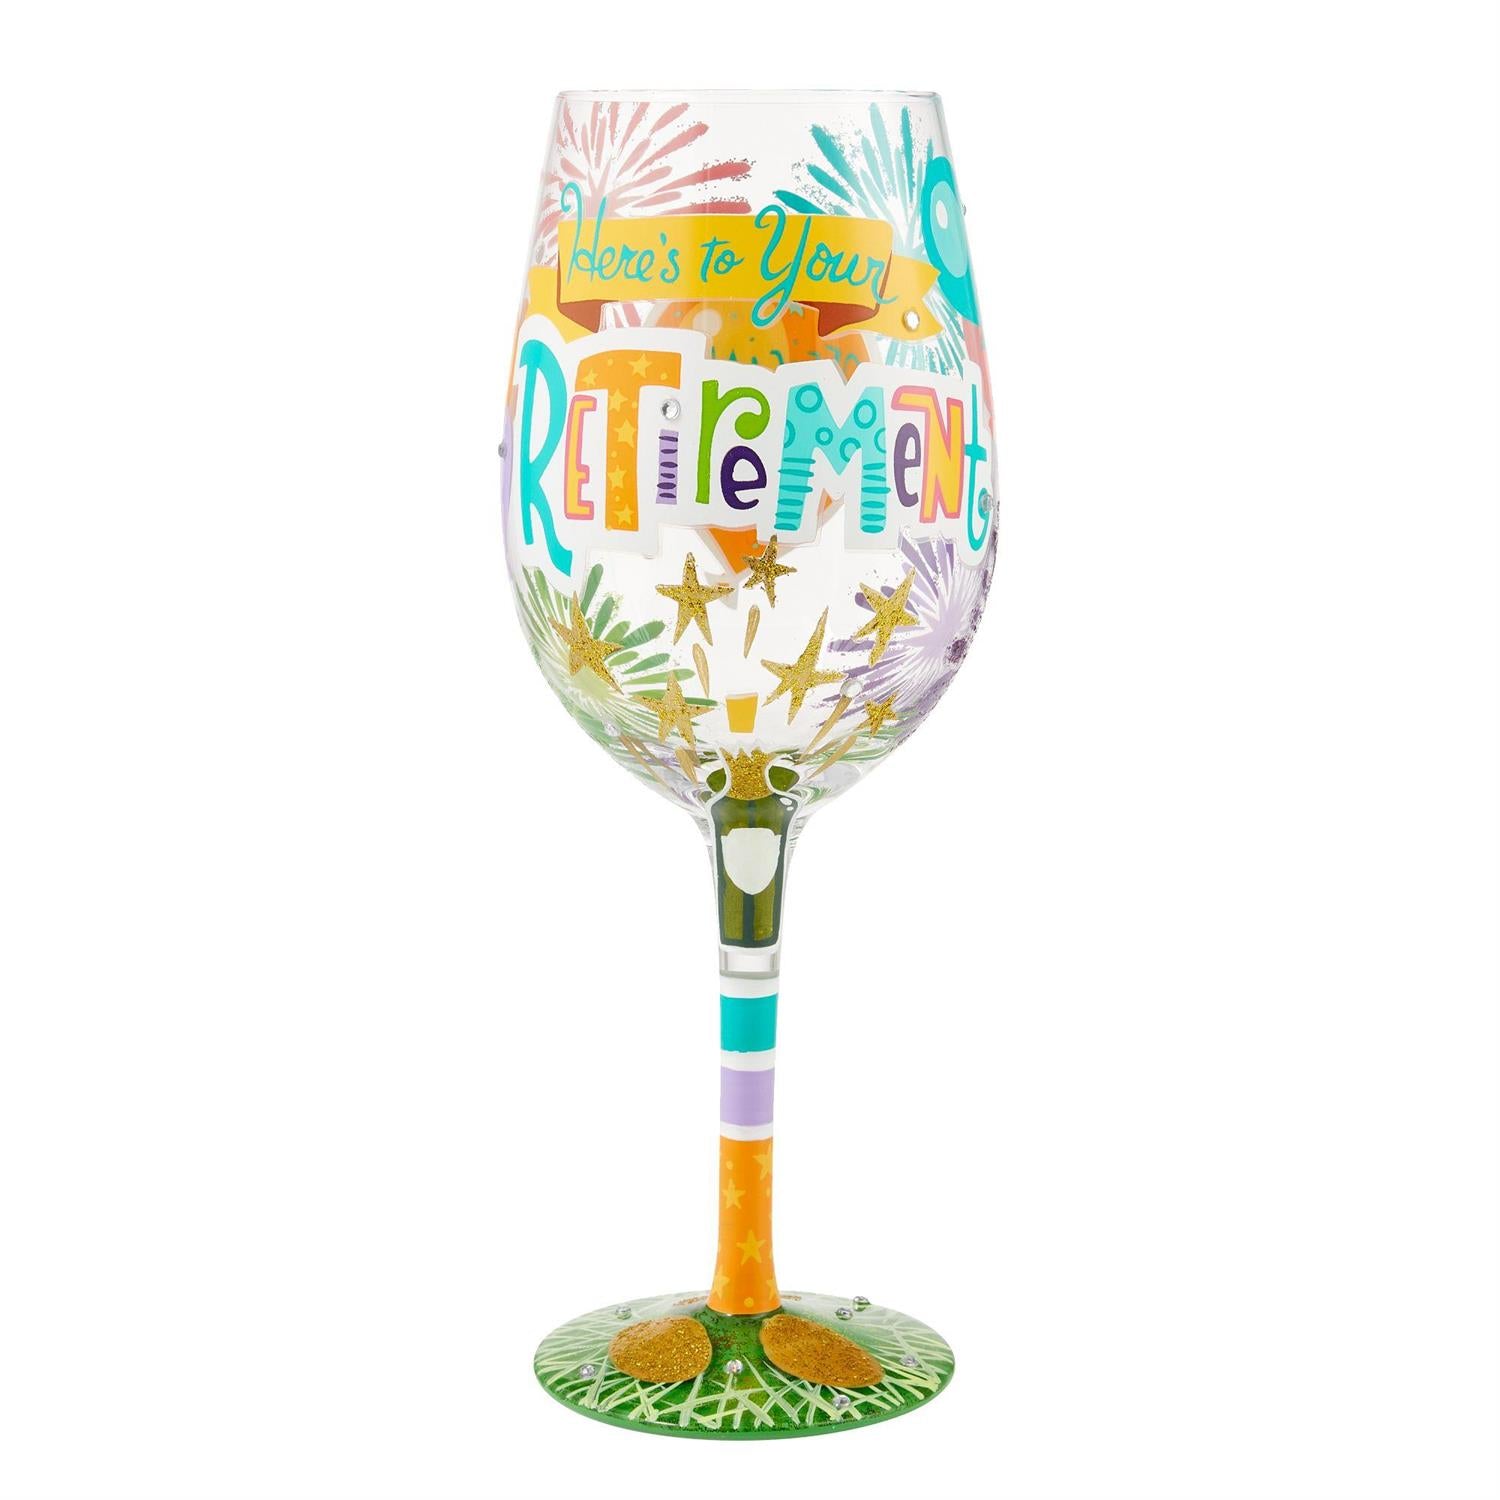 Lolita Wine Glass Here's to Your Retirement